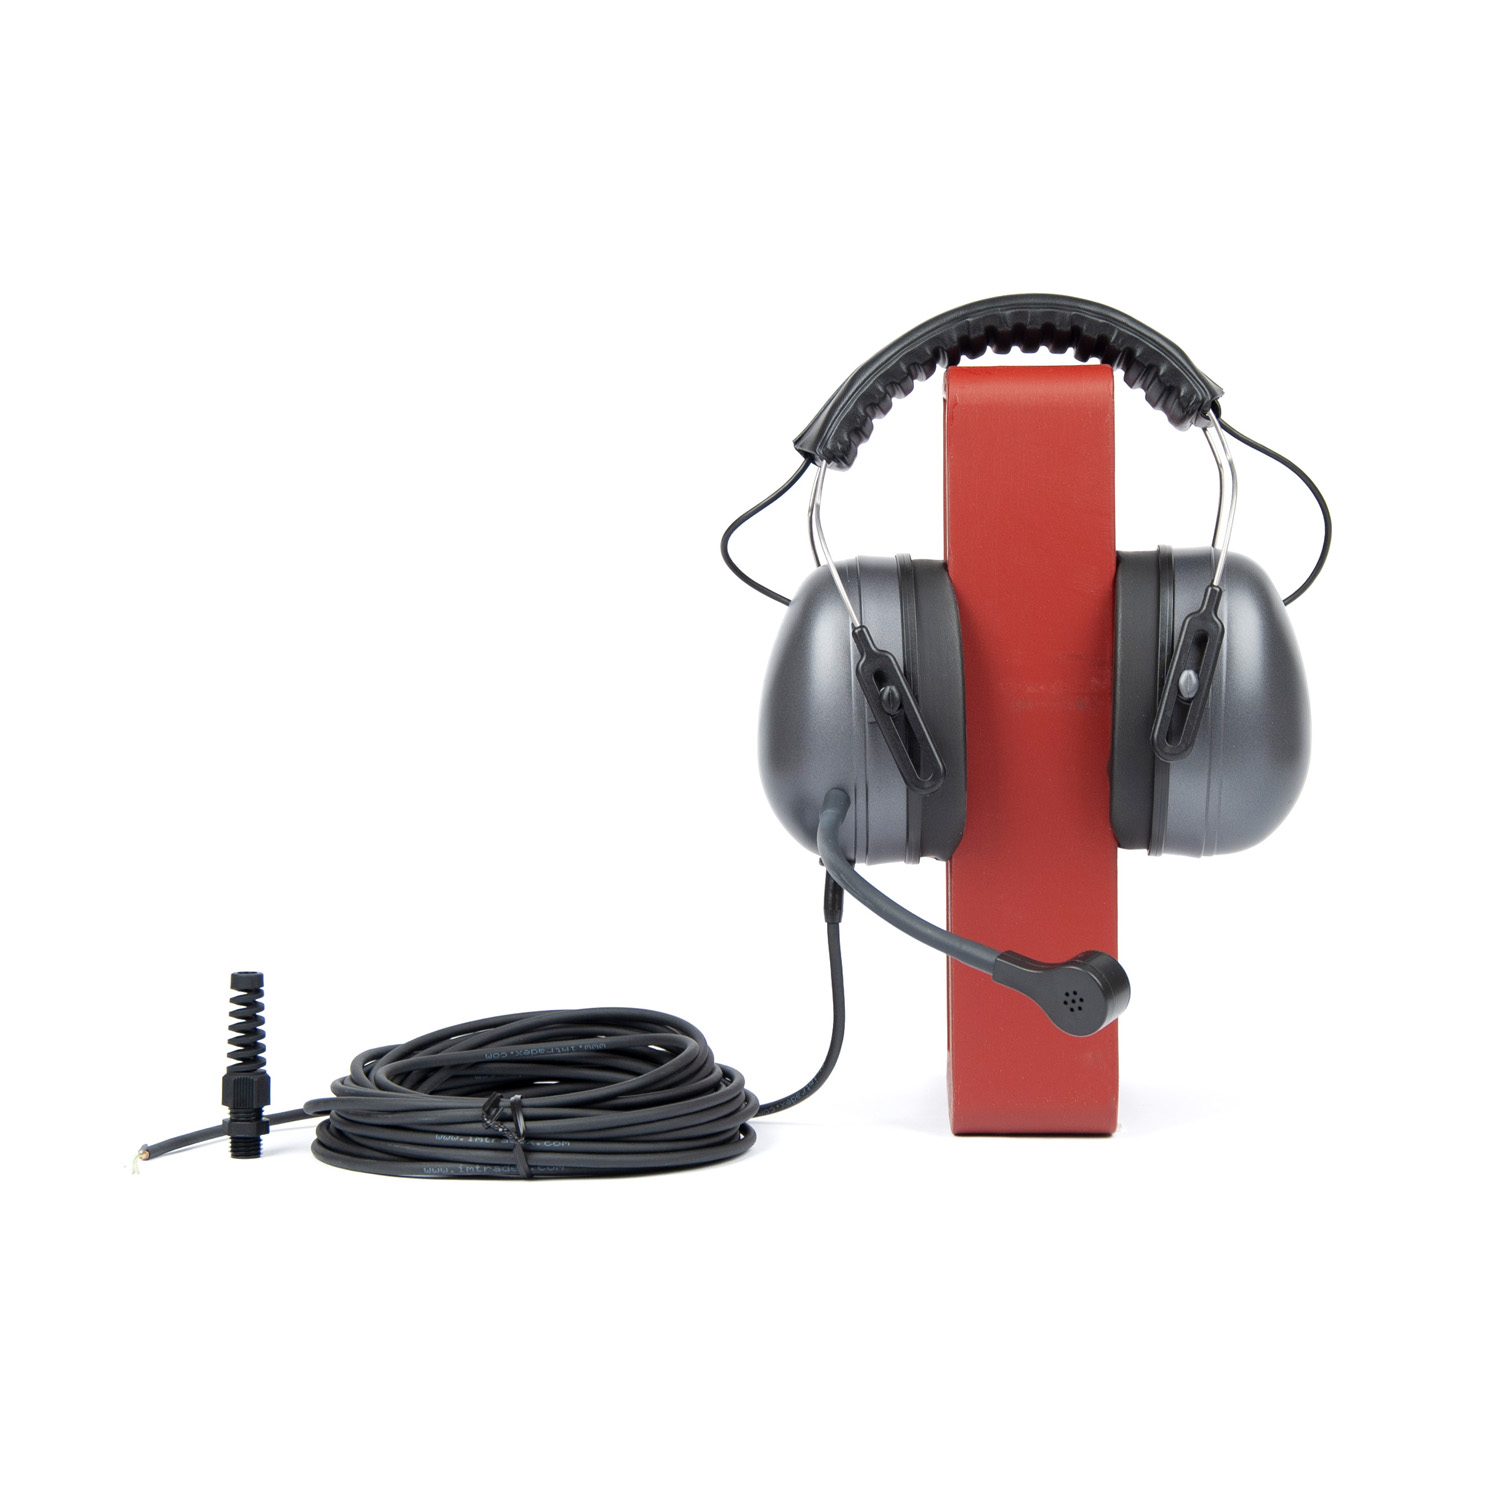 STC-606-10 Headset with 10 mtr. cable for STC-306